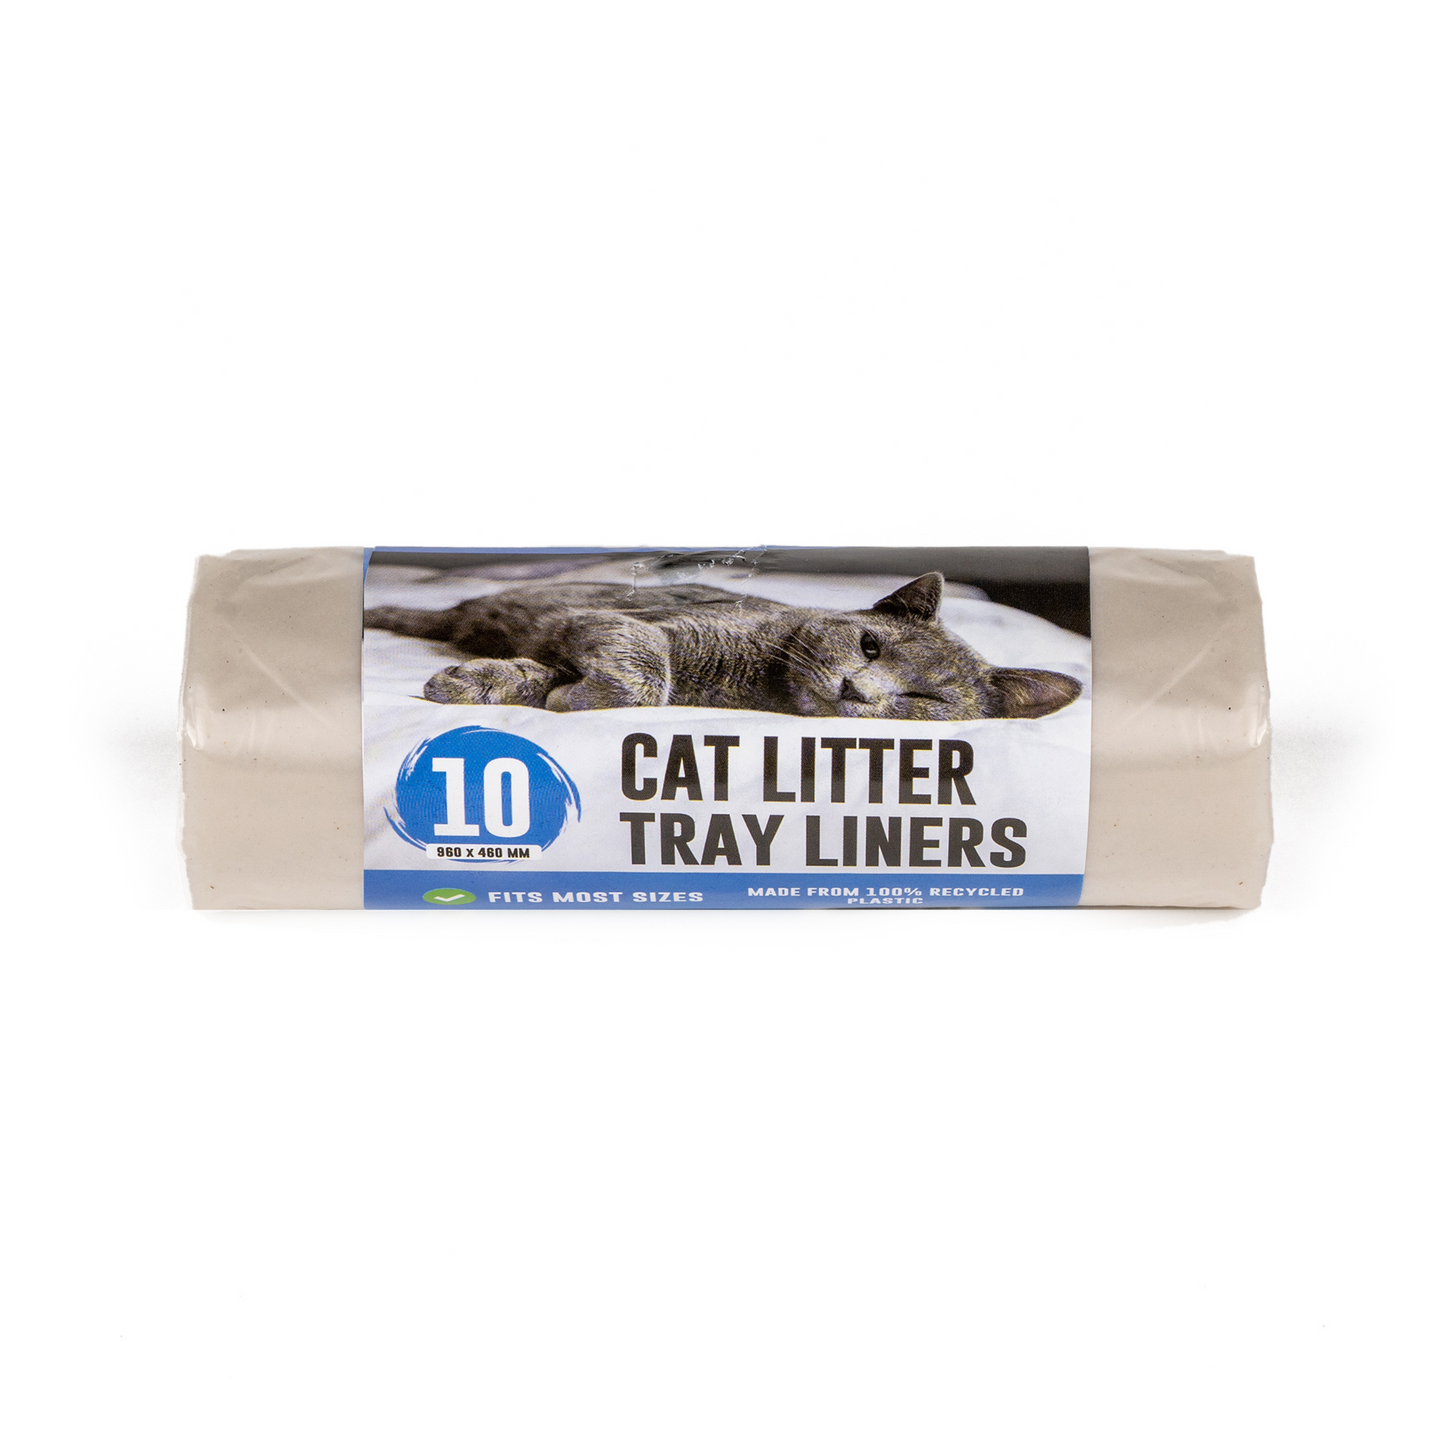 100% Recycled Cat litter liners